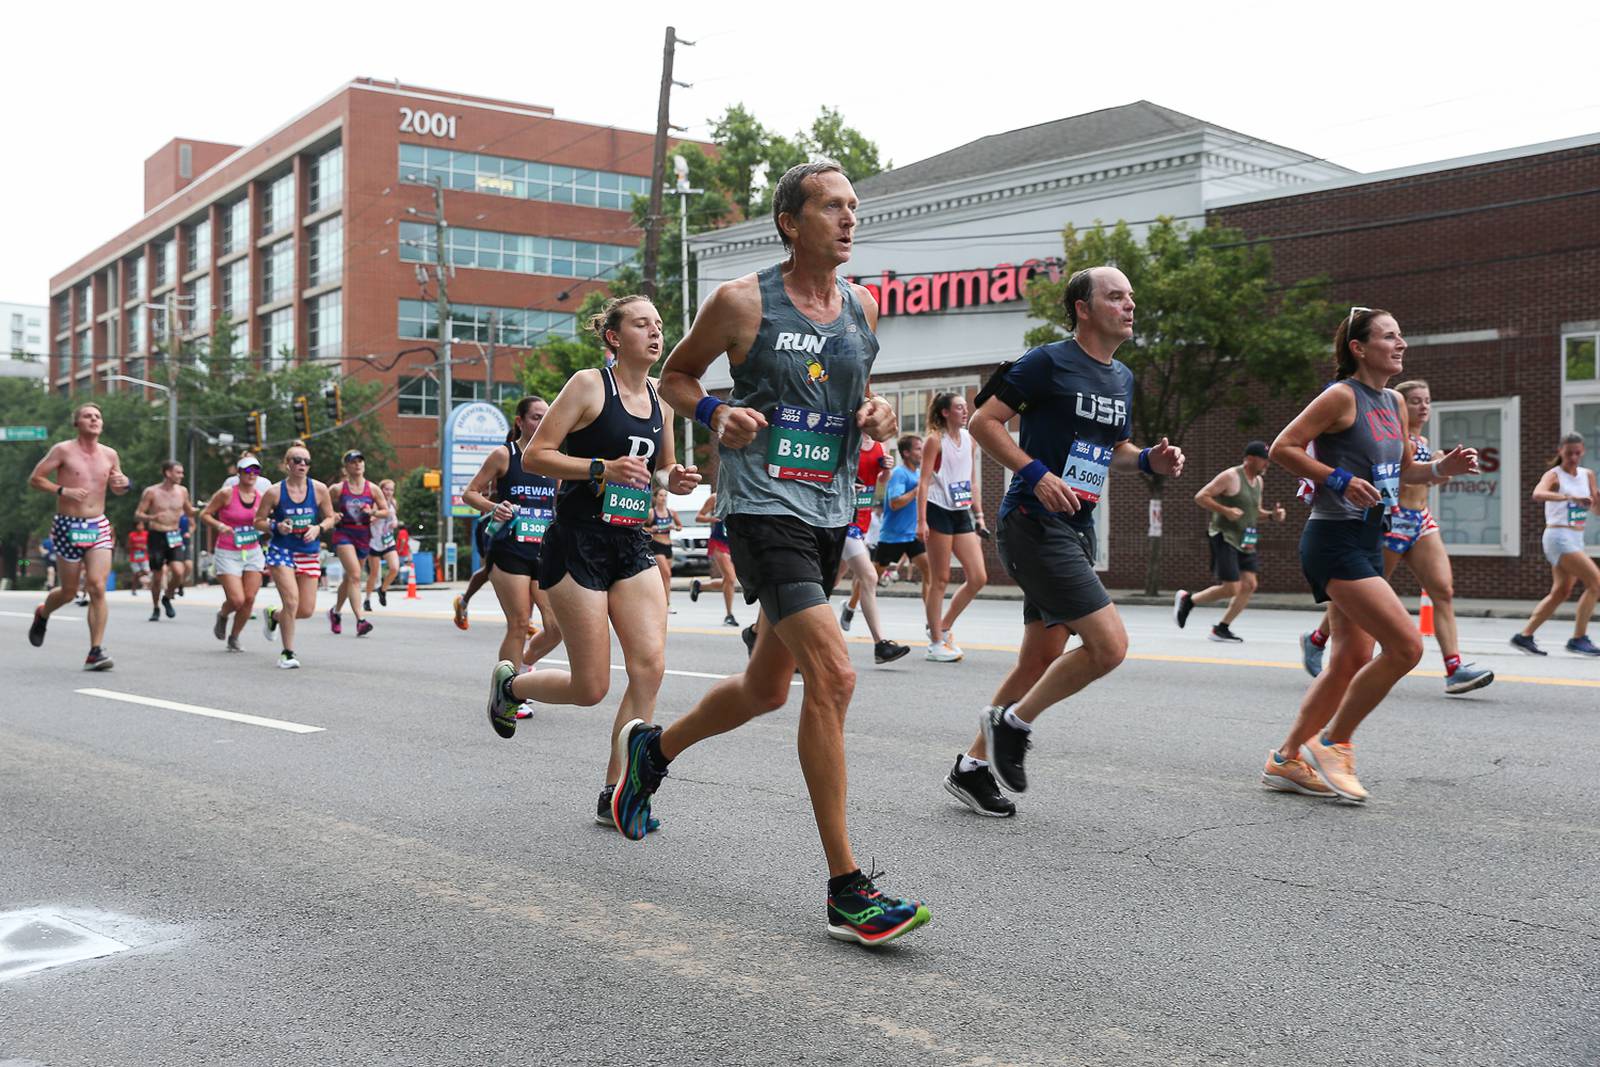 Registration opens for annual AJC Peachtree Road Race WSBTV Channel